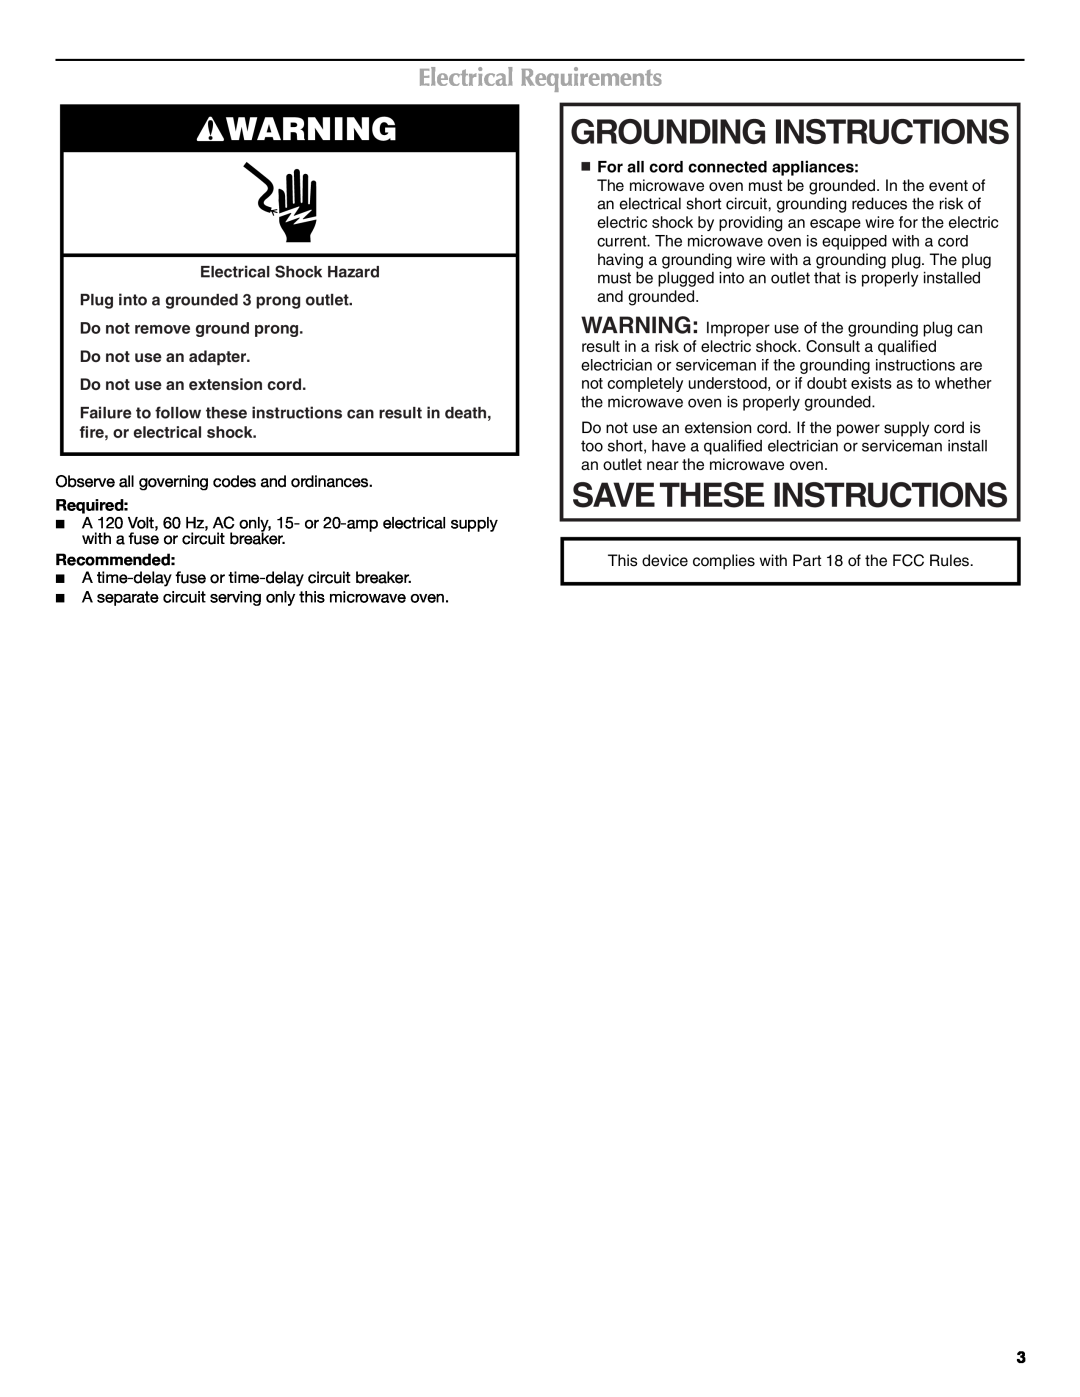 Maytag W10336691A Grounding Instructions, Electrical Requirements, Save These Instructions, Electrical Shock Hazard 